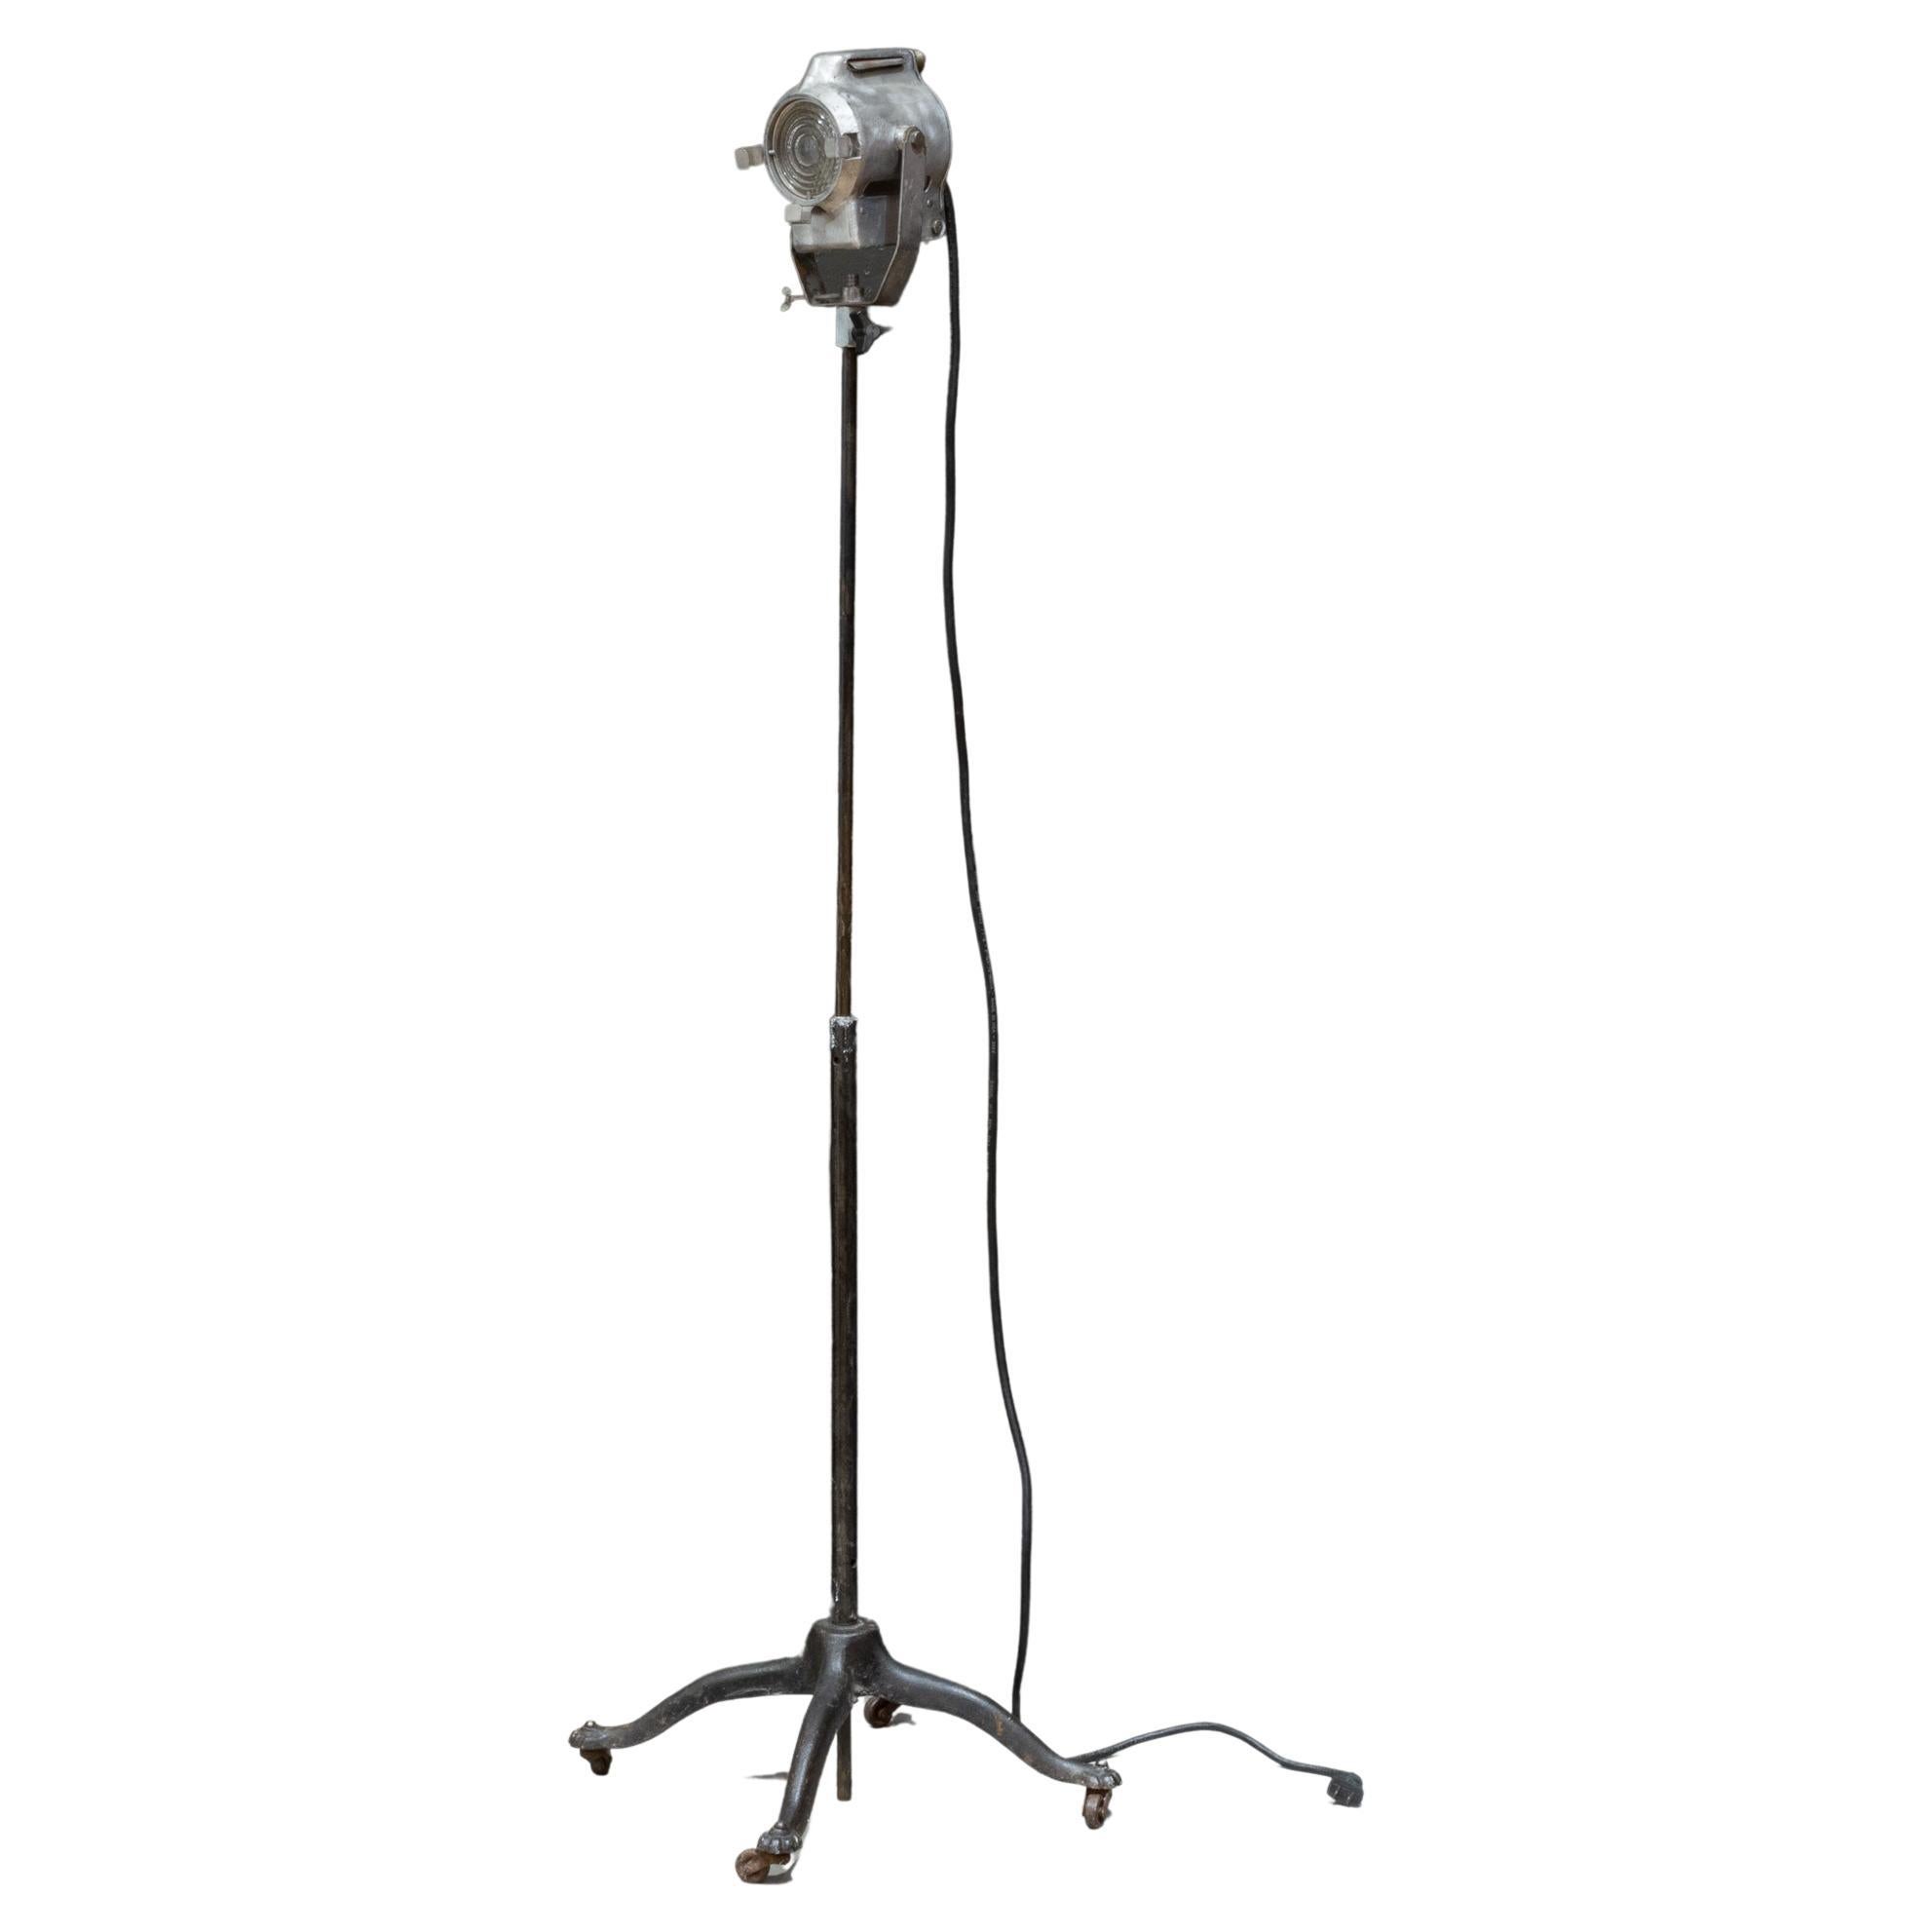 Industrial Stage Light Floor Lamp c.1930-1960 (FREE SHIPPING)